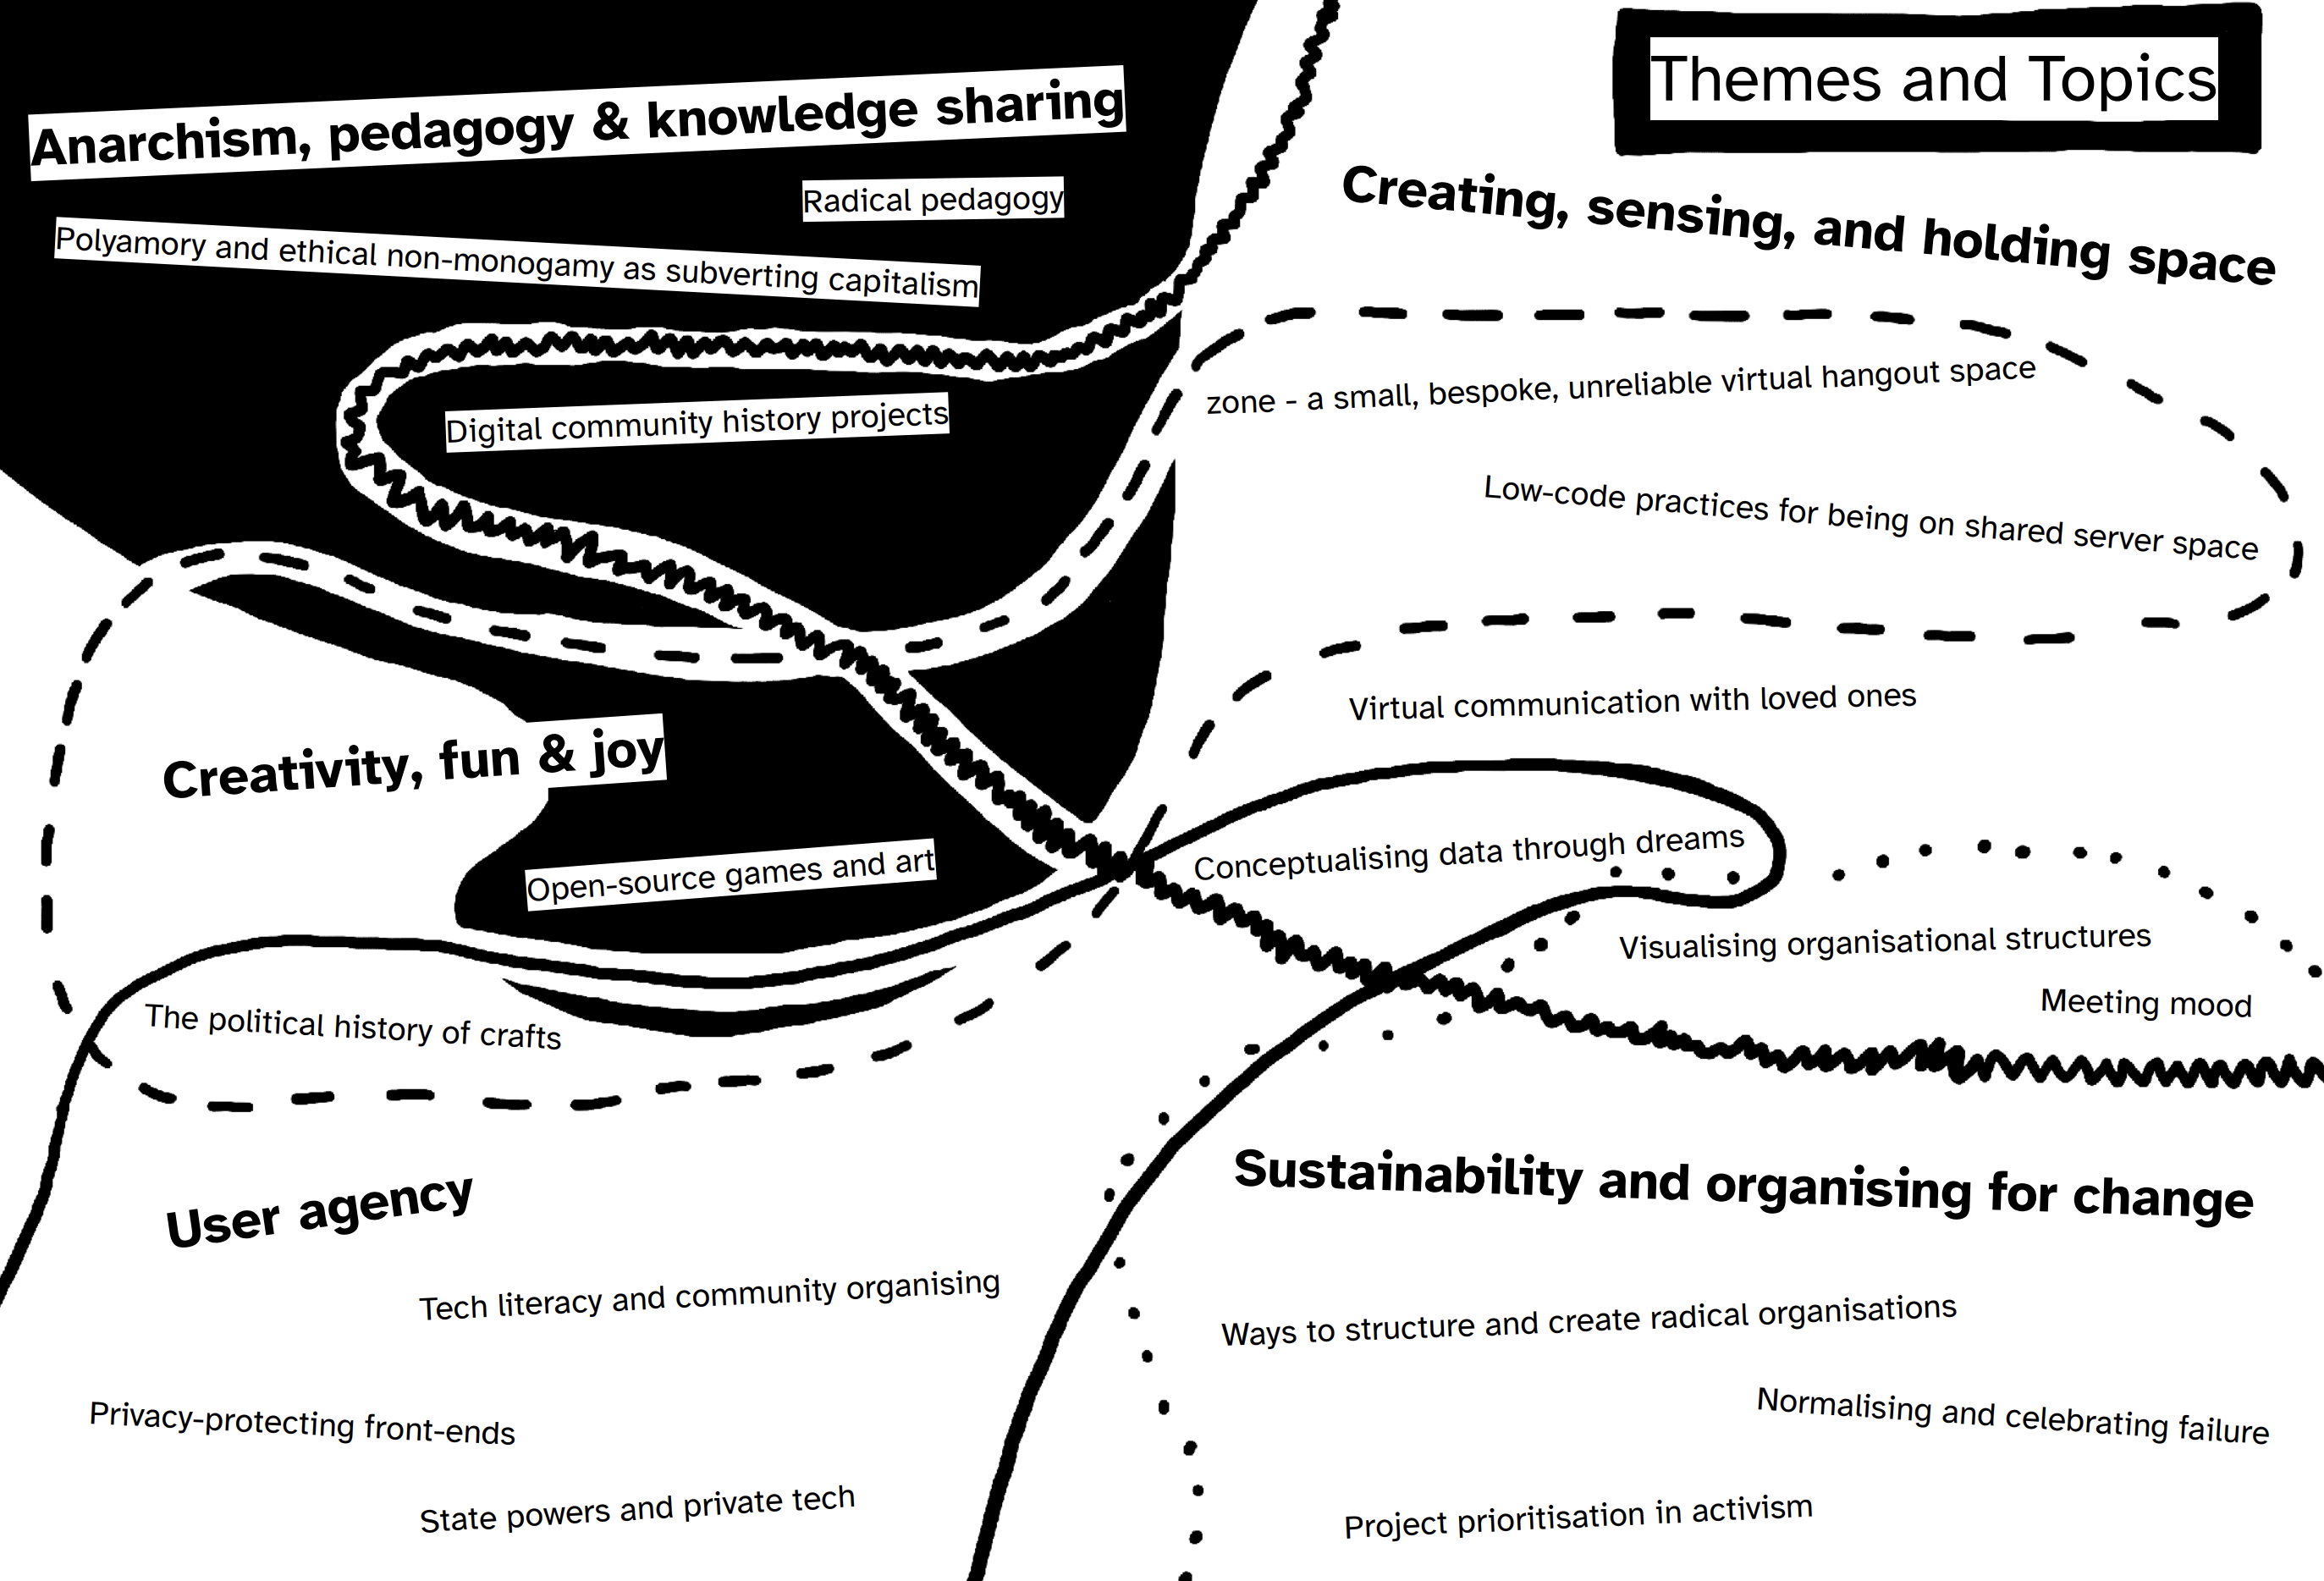 a black and white diagram showing the themes and topics visually organised, showing overlapping areas between themes